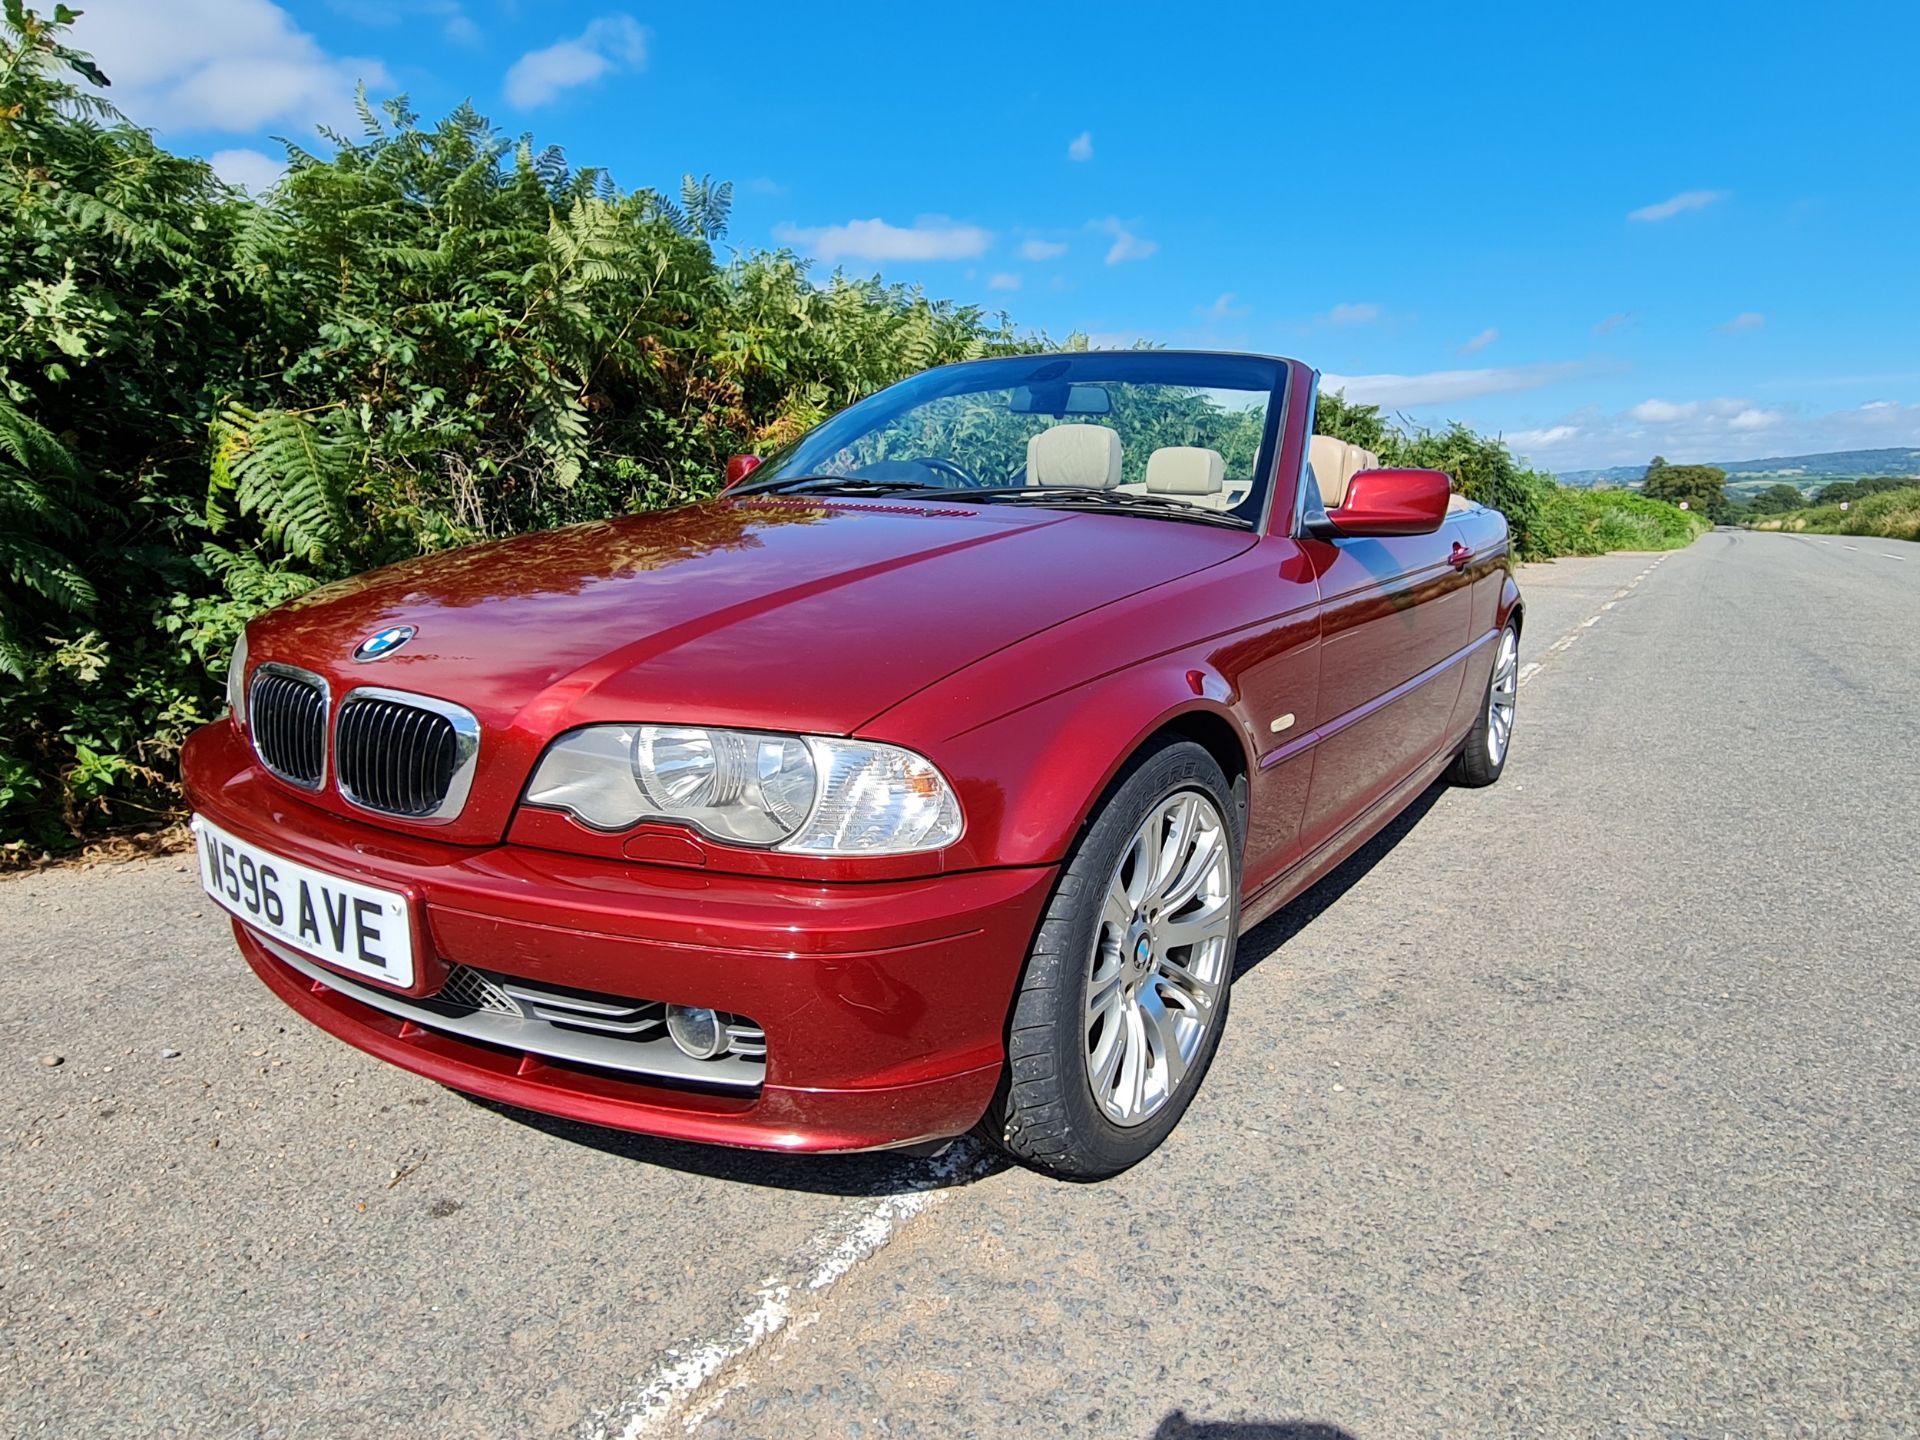 2000 BMW 330Ci Convertible Registration number W596 AVE Chassis number WBABS52060EH92204 Engine - Image 16 of 16